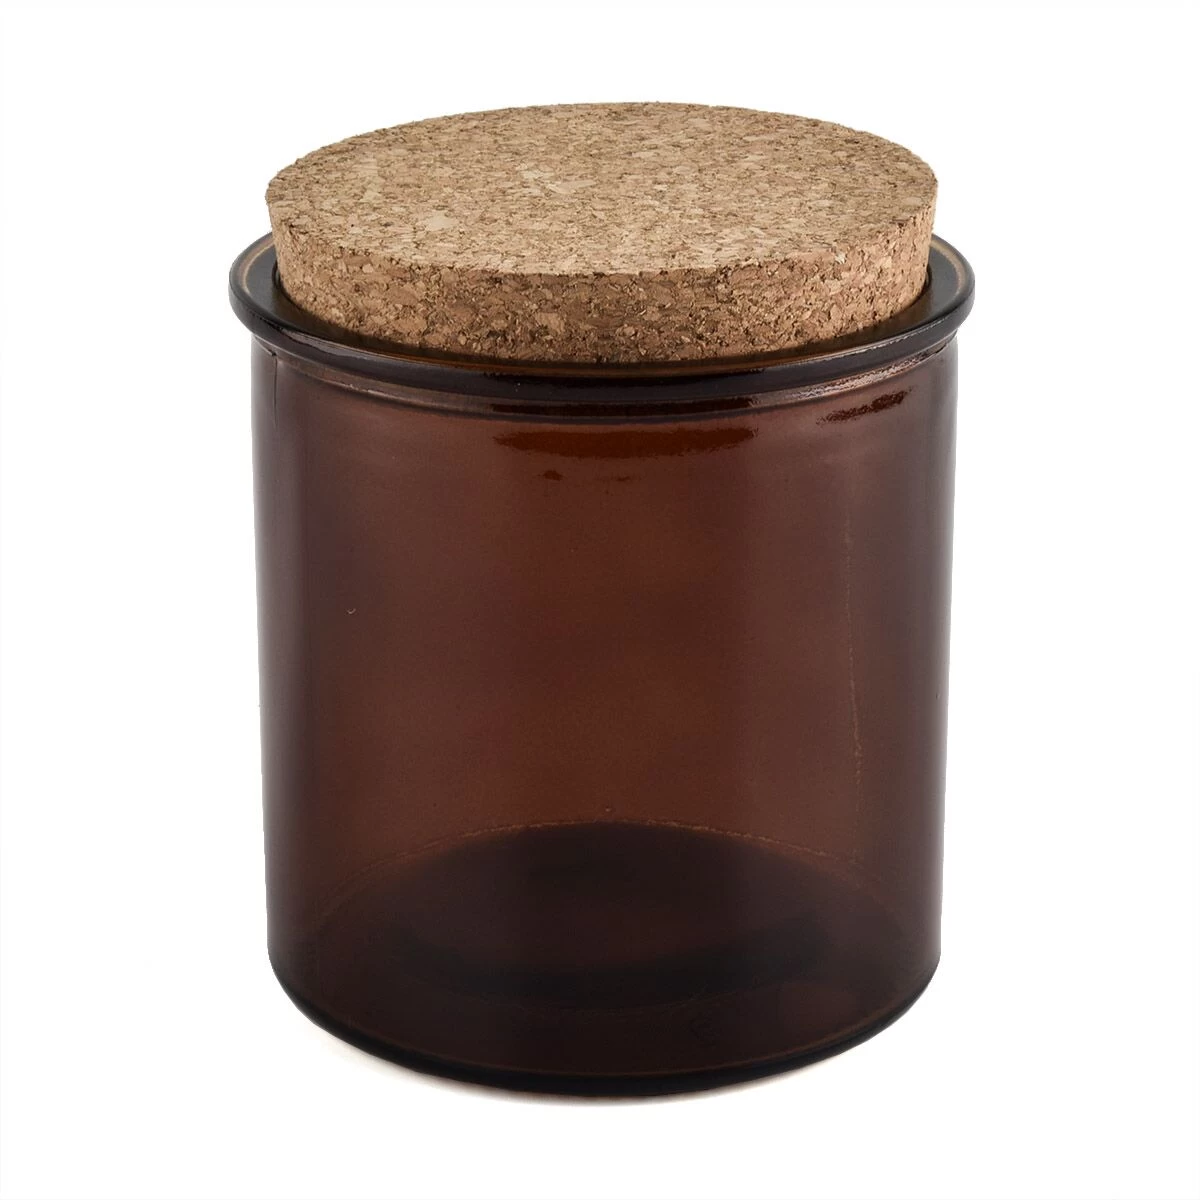 15oz amber glass candle jar with cork